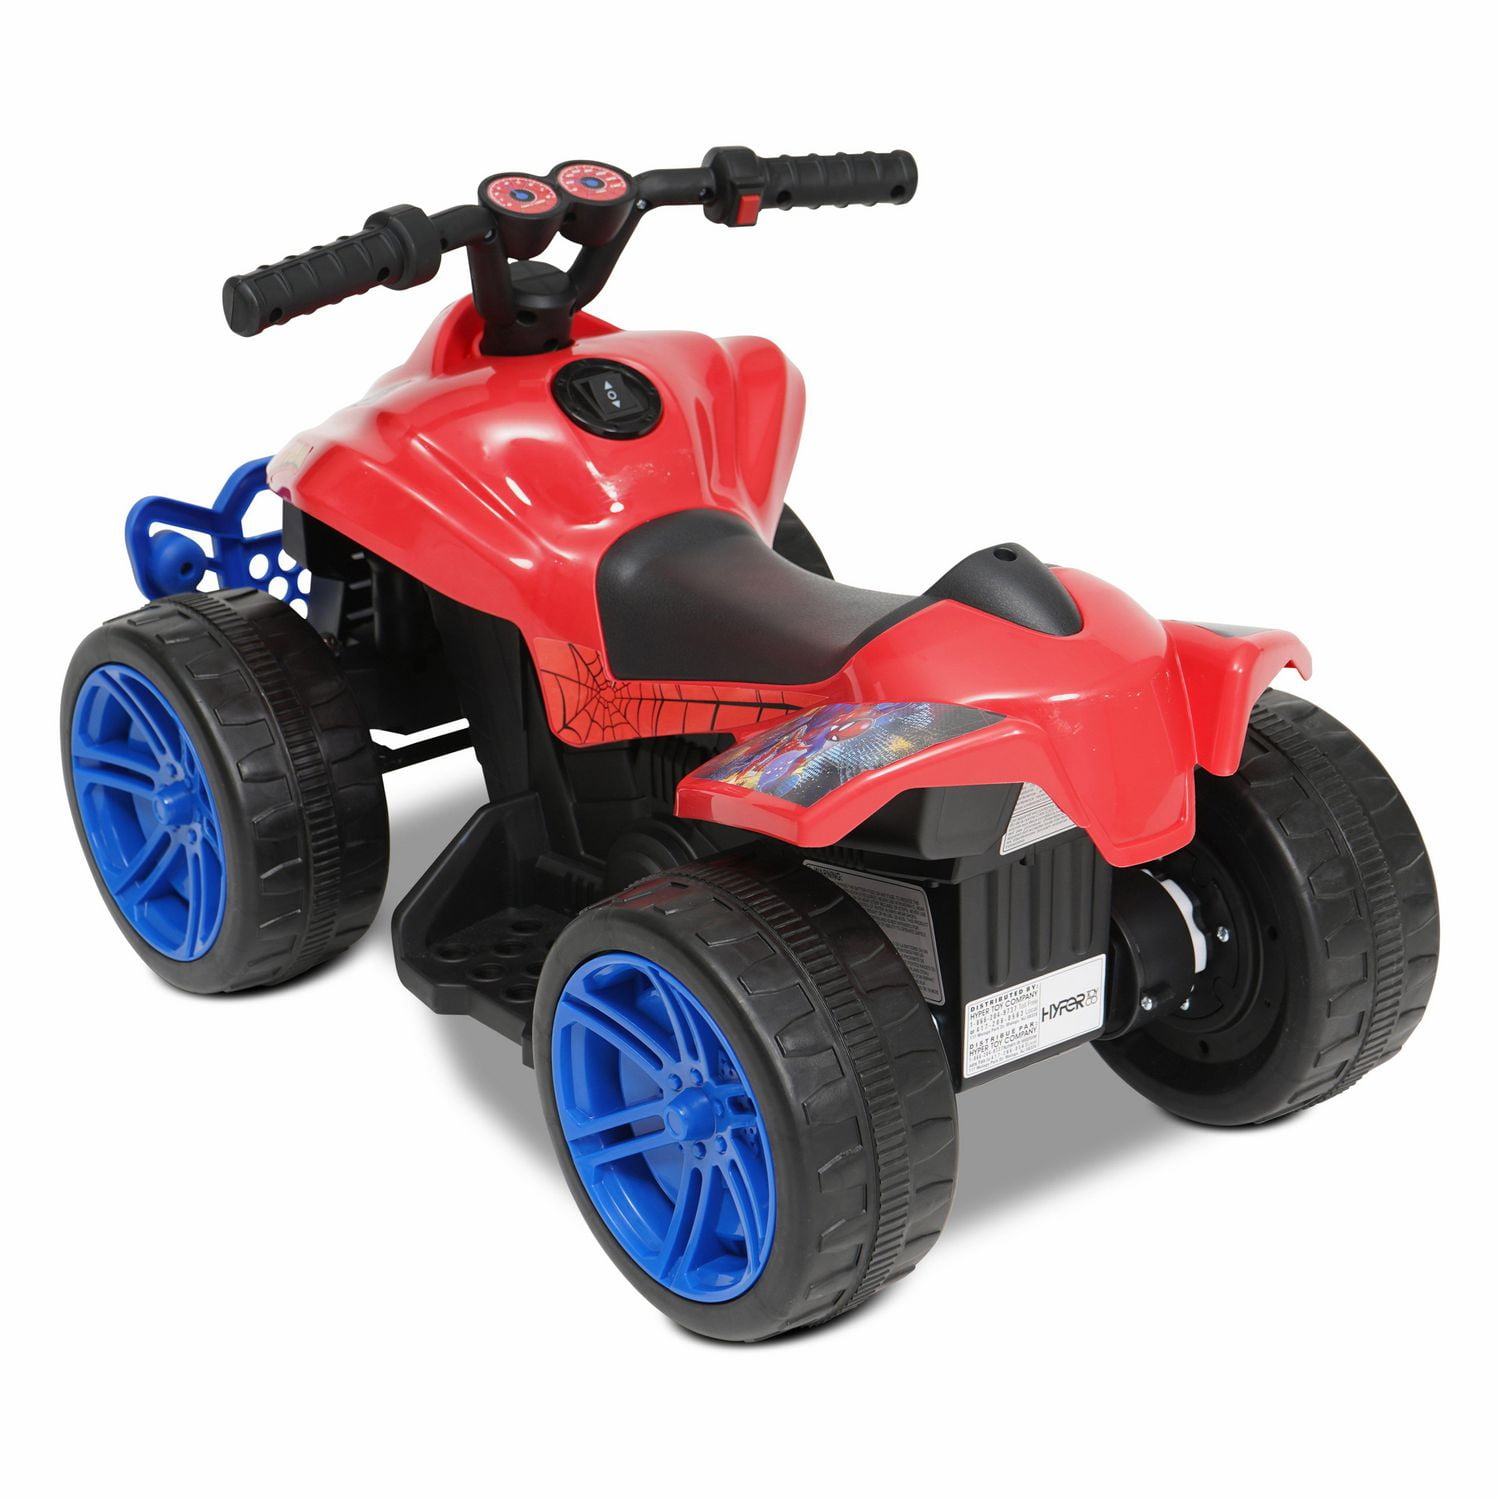 Marvel Spiderman ATV 6 Volt Ride On Toy Goes Forward and Reverse 